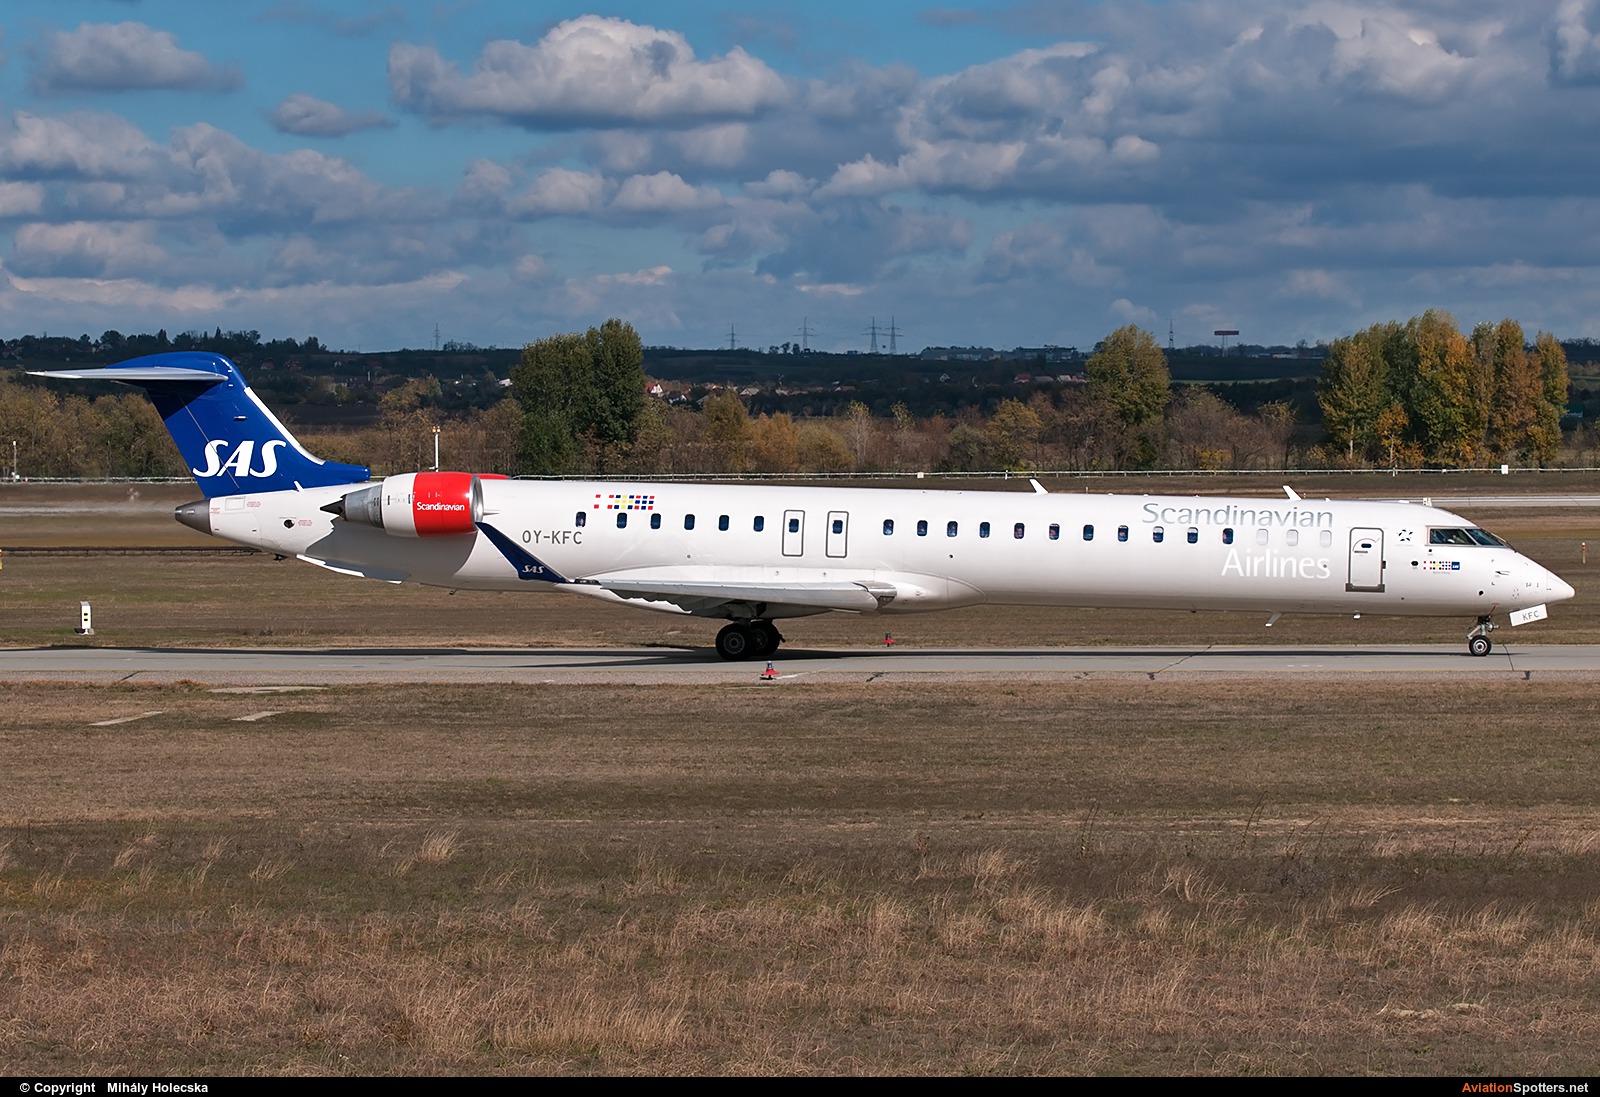 SAS - Scandinavian Airlines  -  CL-600 Challenger 600  (OY-KFC) By Mihály Holecska (Misixx)